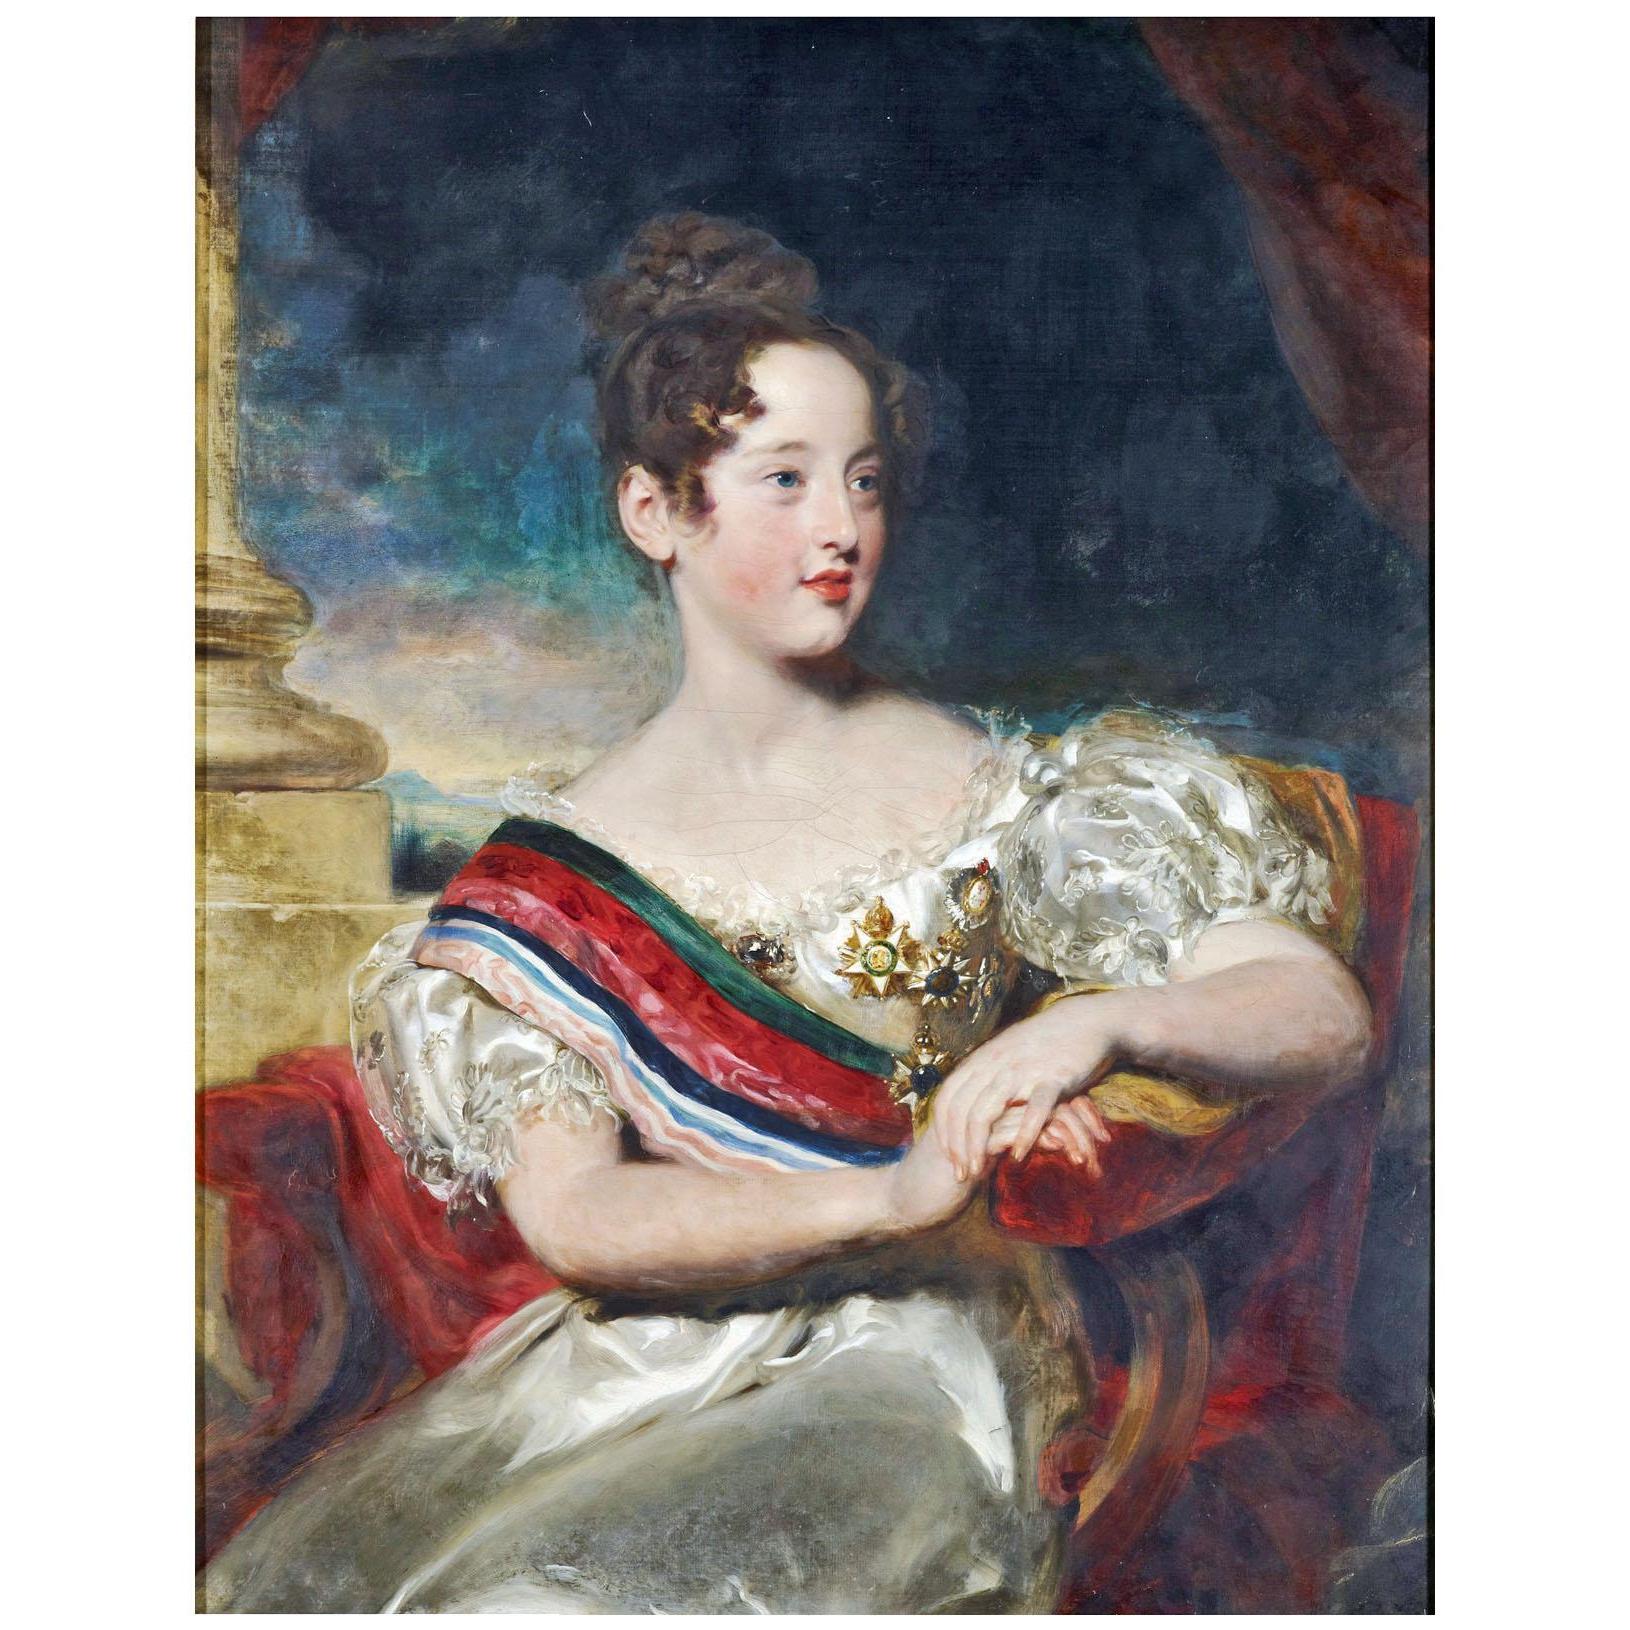 Thomas Lawrence. Maria II, Queen of Portugal. 1829. Royal Collection London